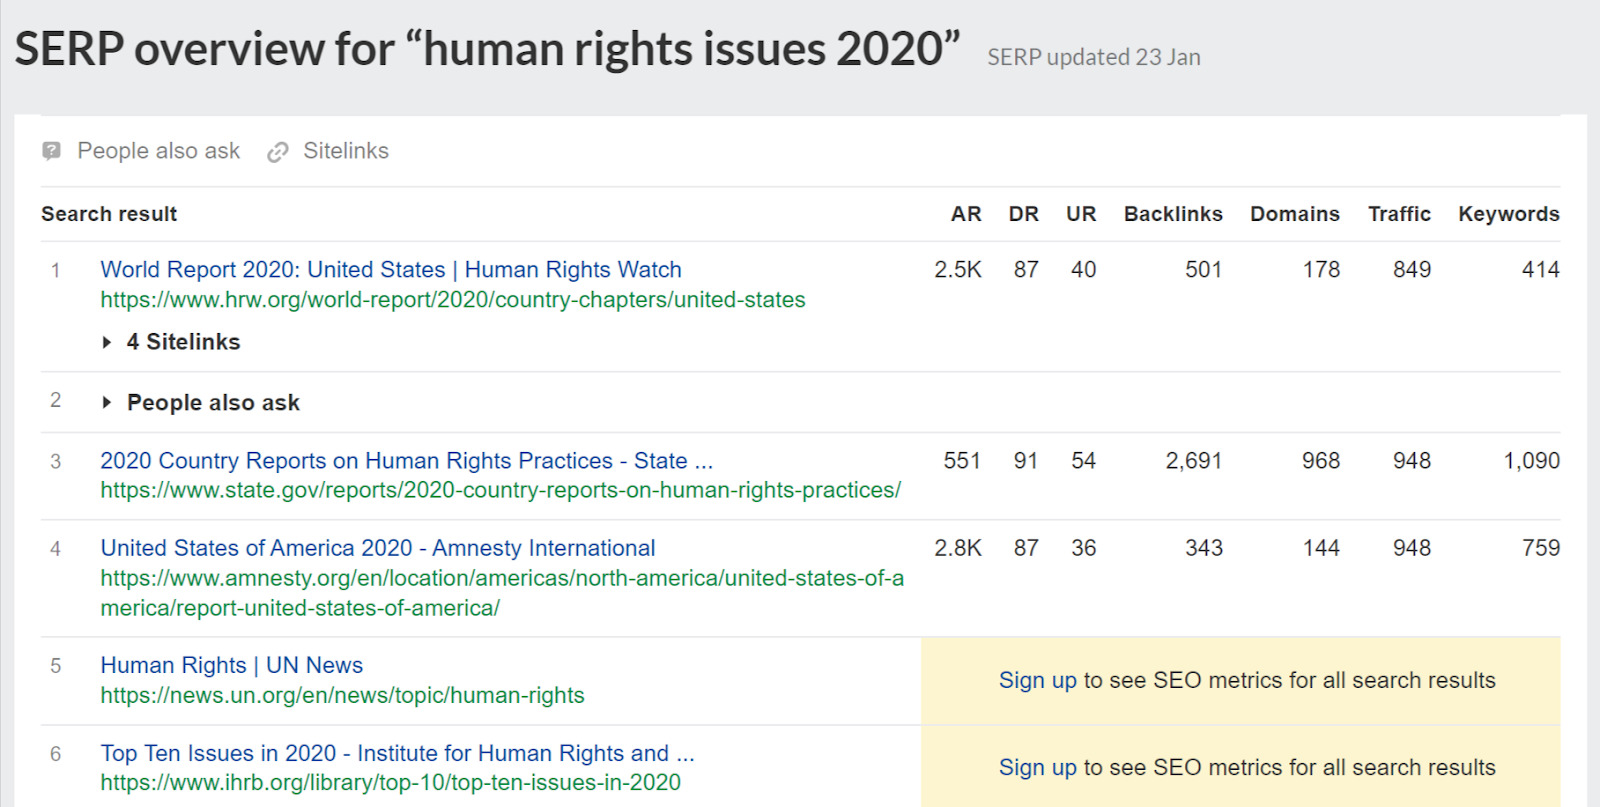 SERP overview for "human rights issues 2020" 